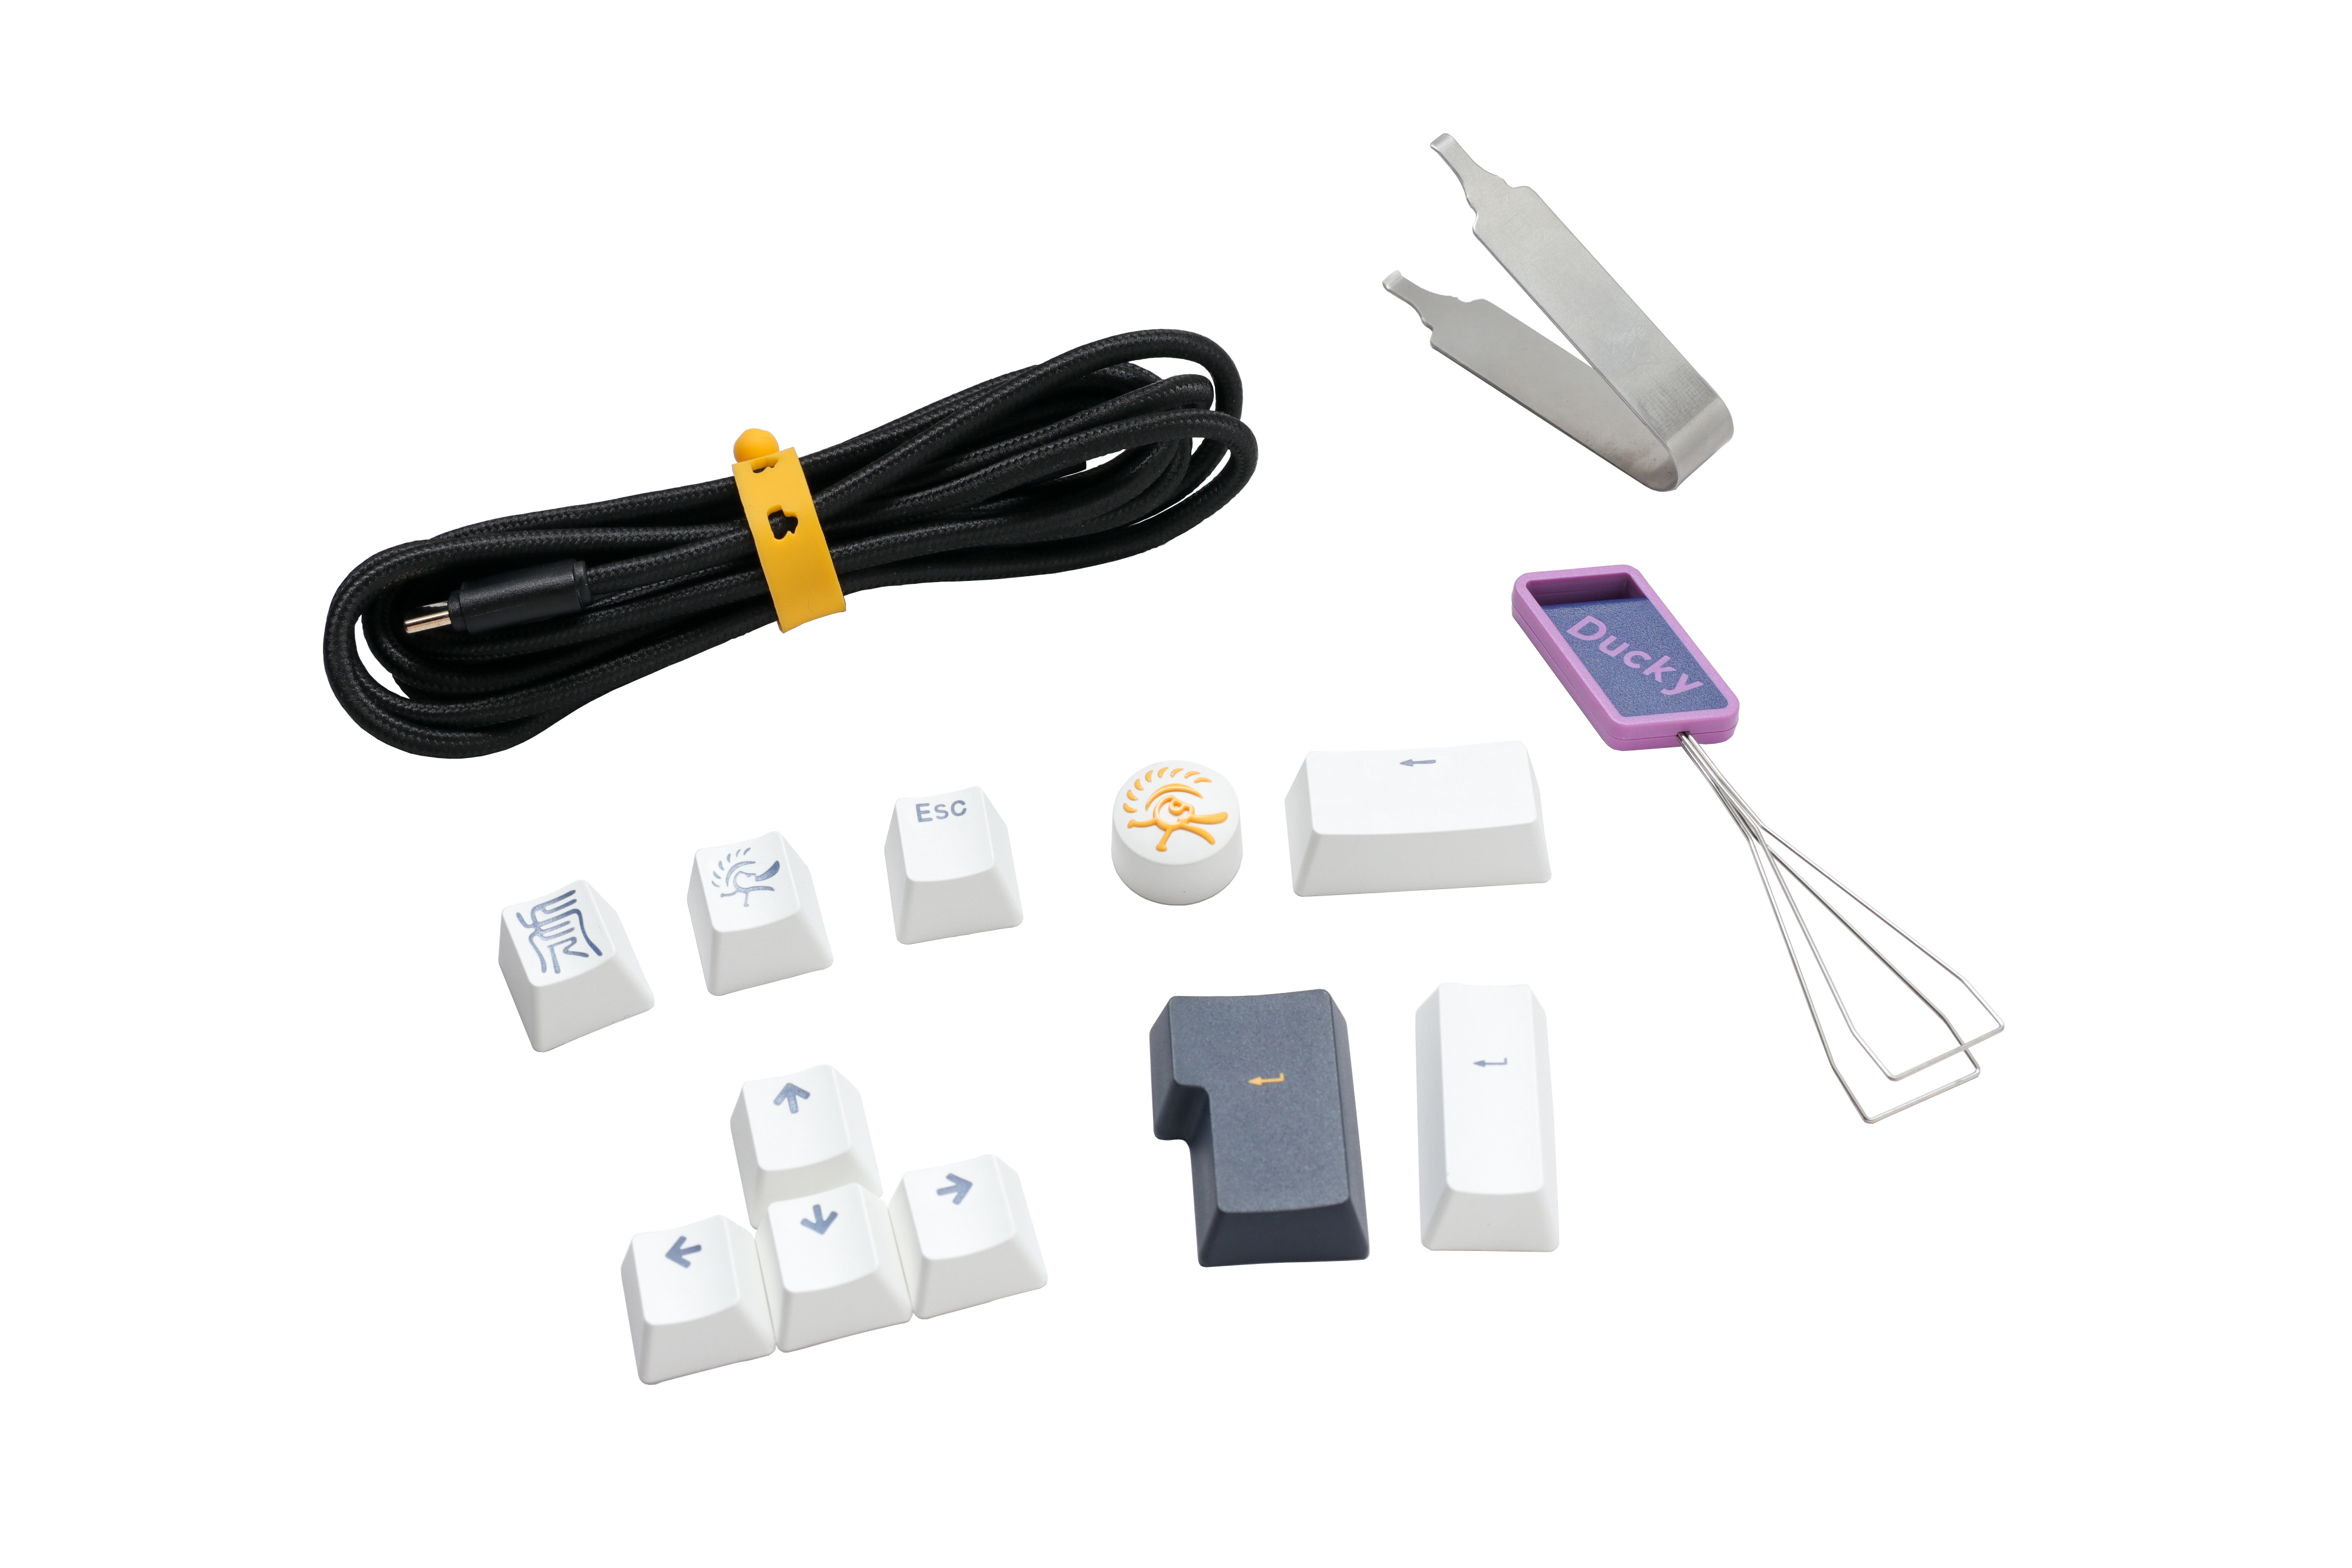 An assortment of Ducky keyboard accessories including a keycap puller, various PBT keycaps with symbols, a coiled cable, and additional small tools, all displayed on a white background.